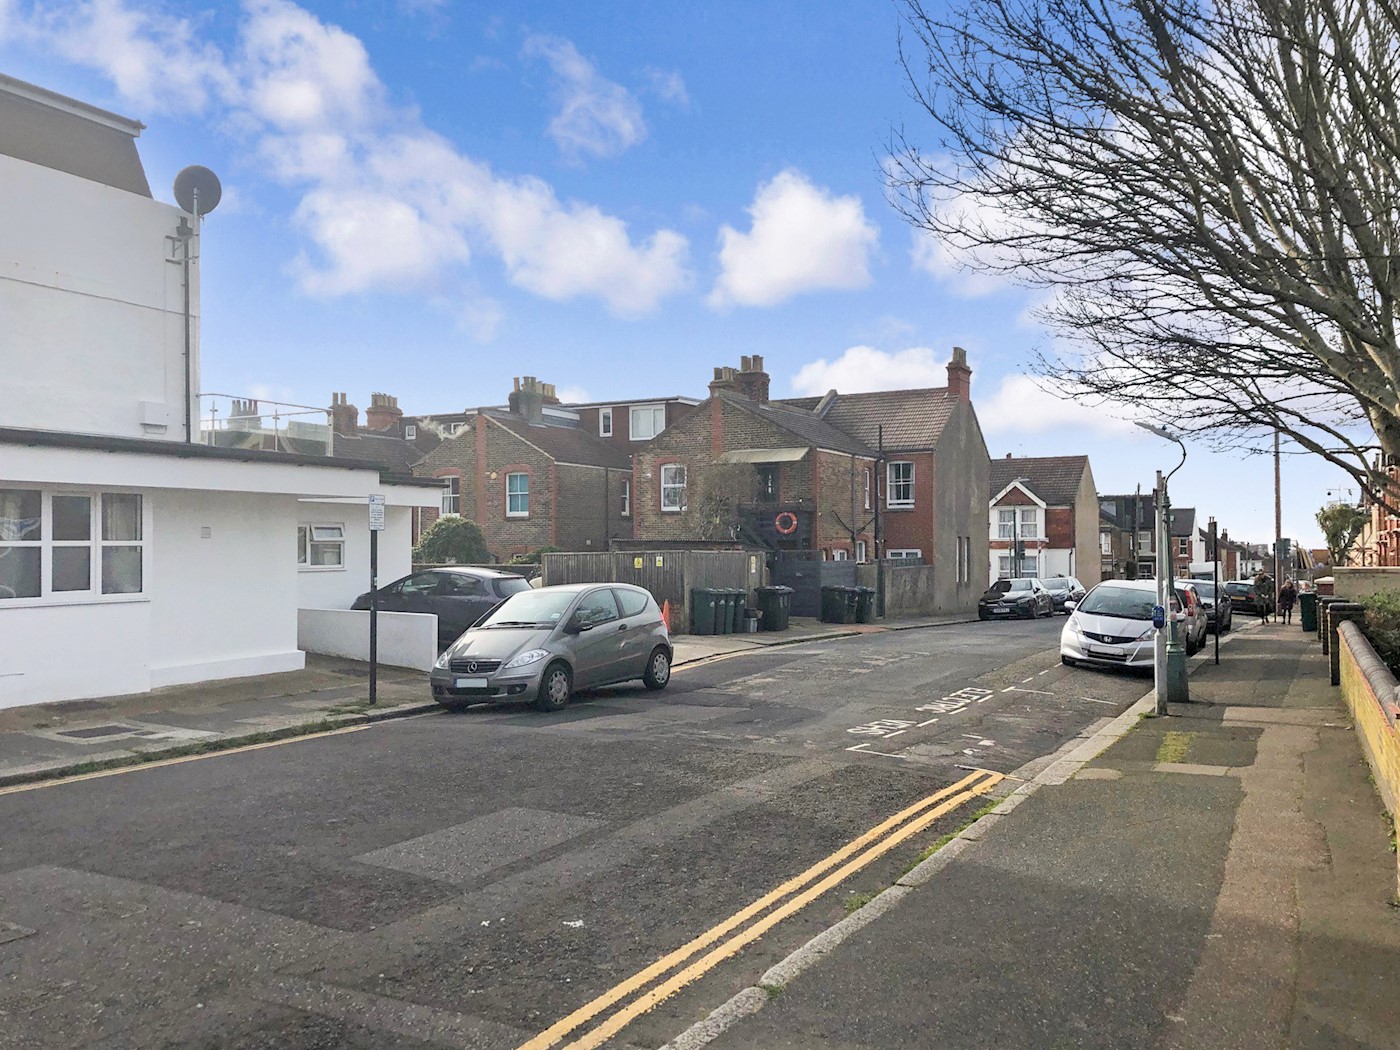 Land at Leighton Road, Hove, BN3 7AE 1/8